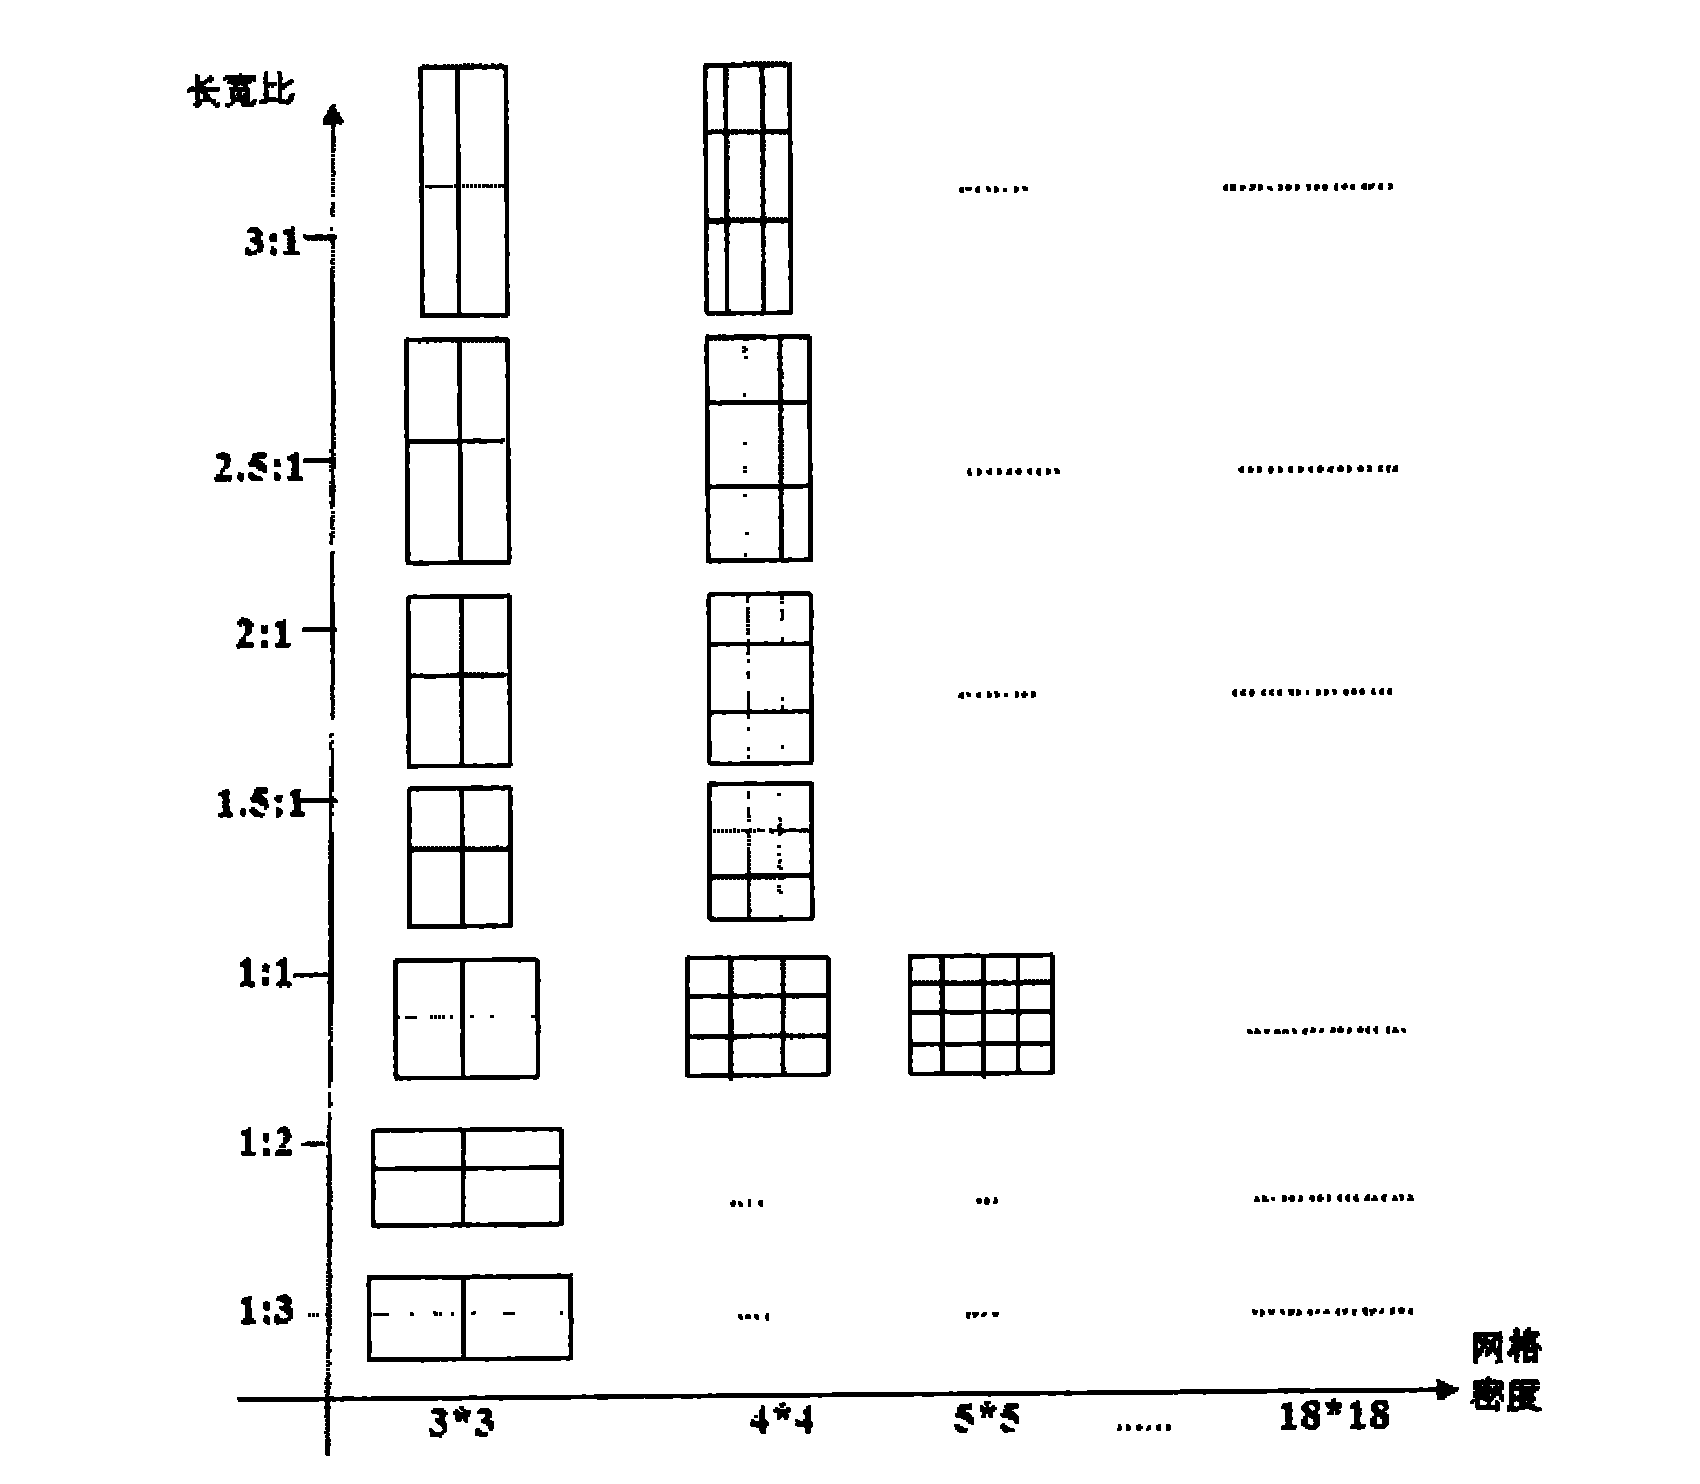 Collaborative design method for power/ground network and layout planning based on pattern matching